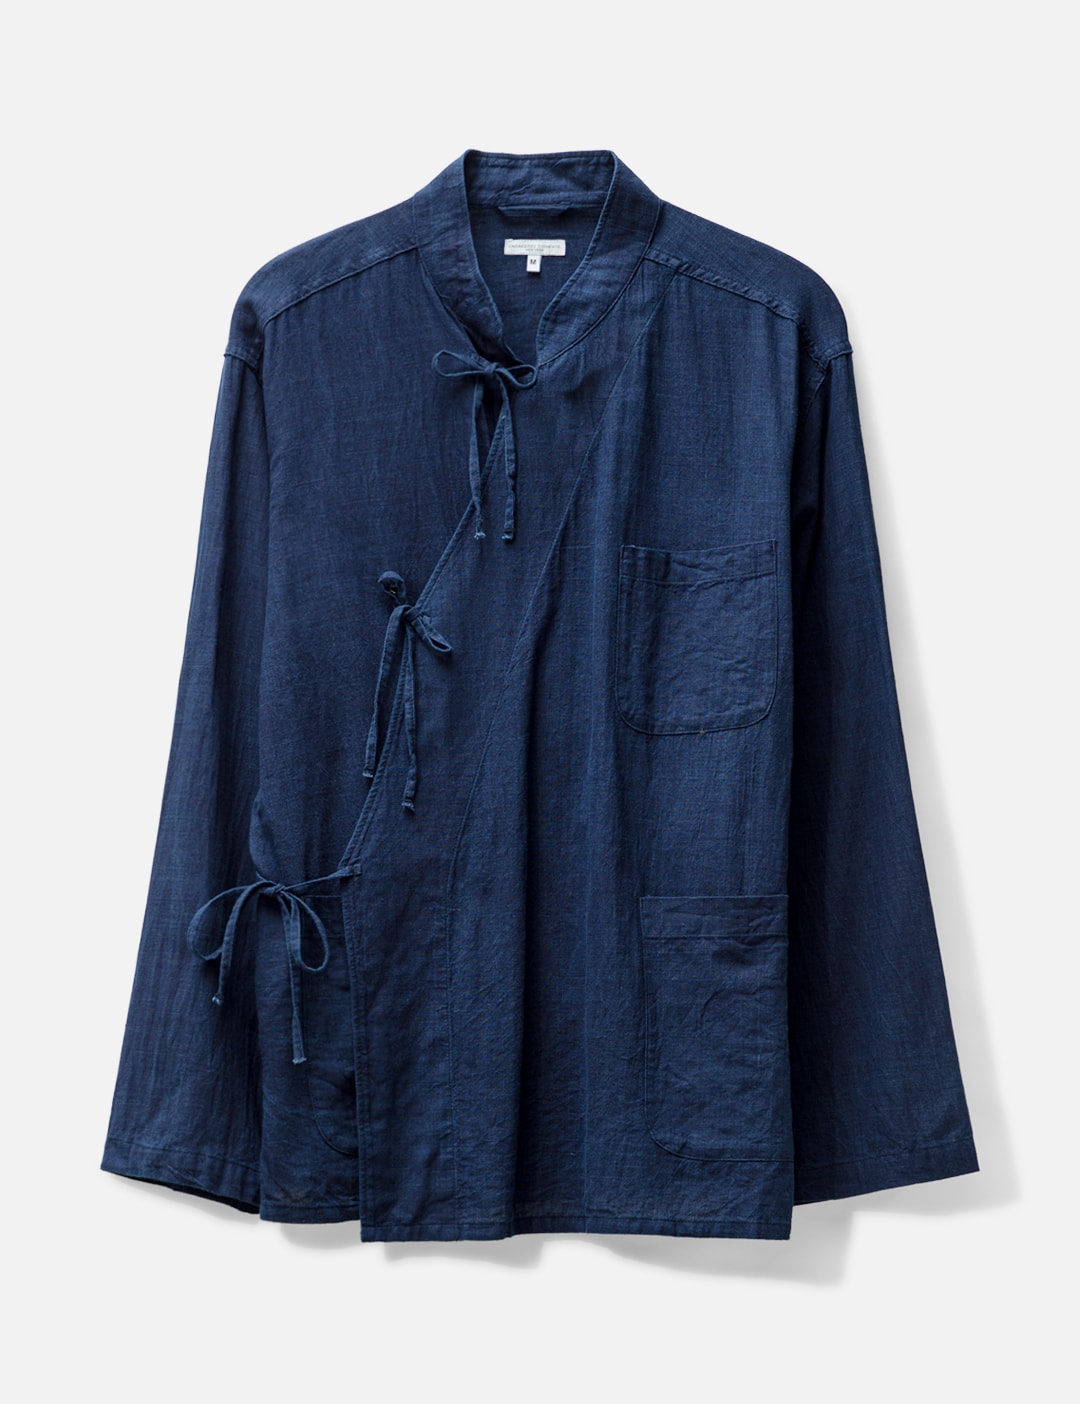 Engineered Garments - Tibet Shirt | HBX - Globally Curated Fashion and